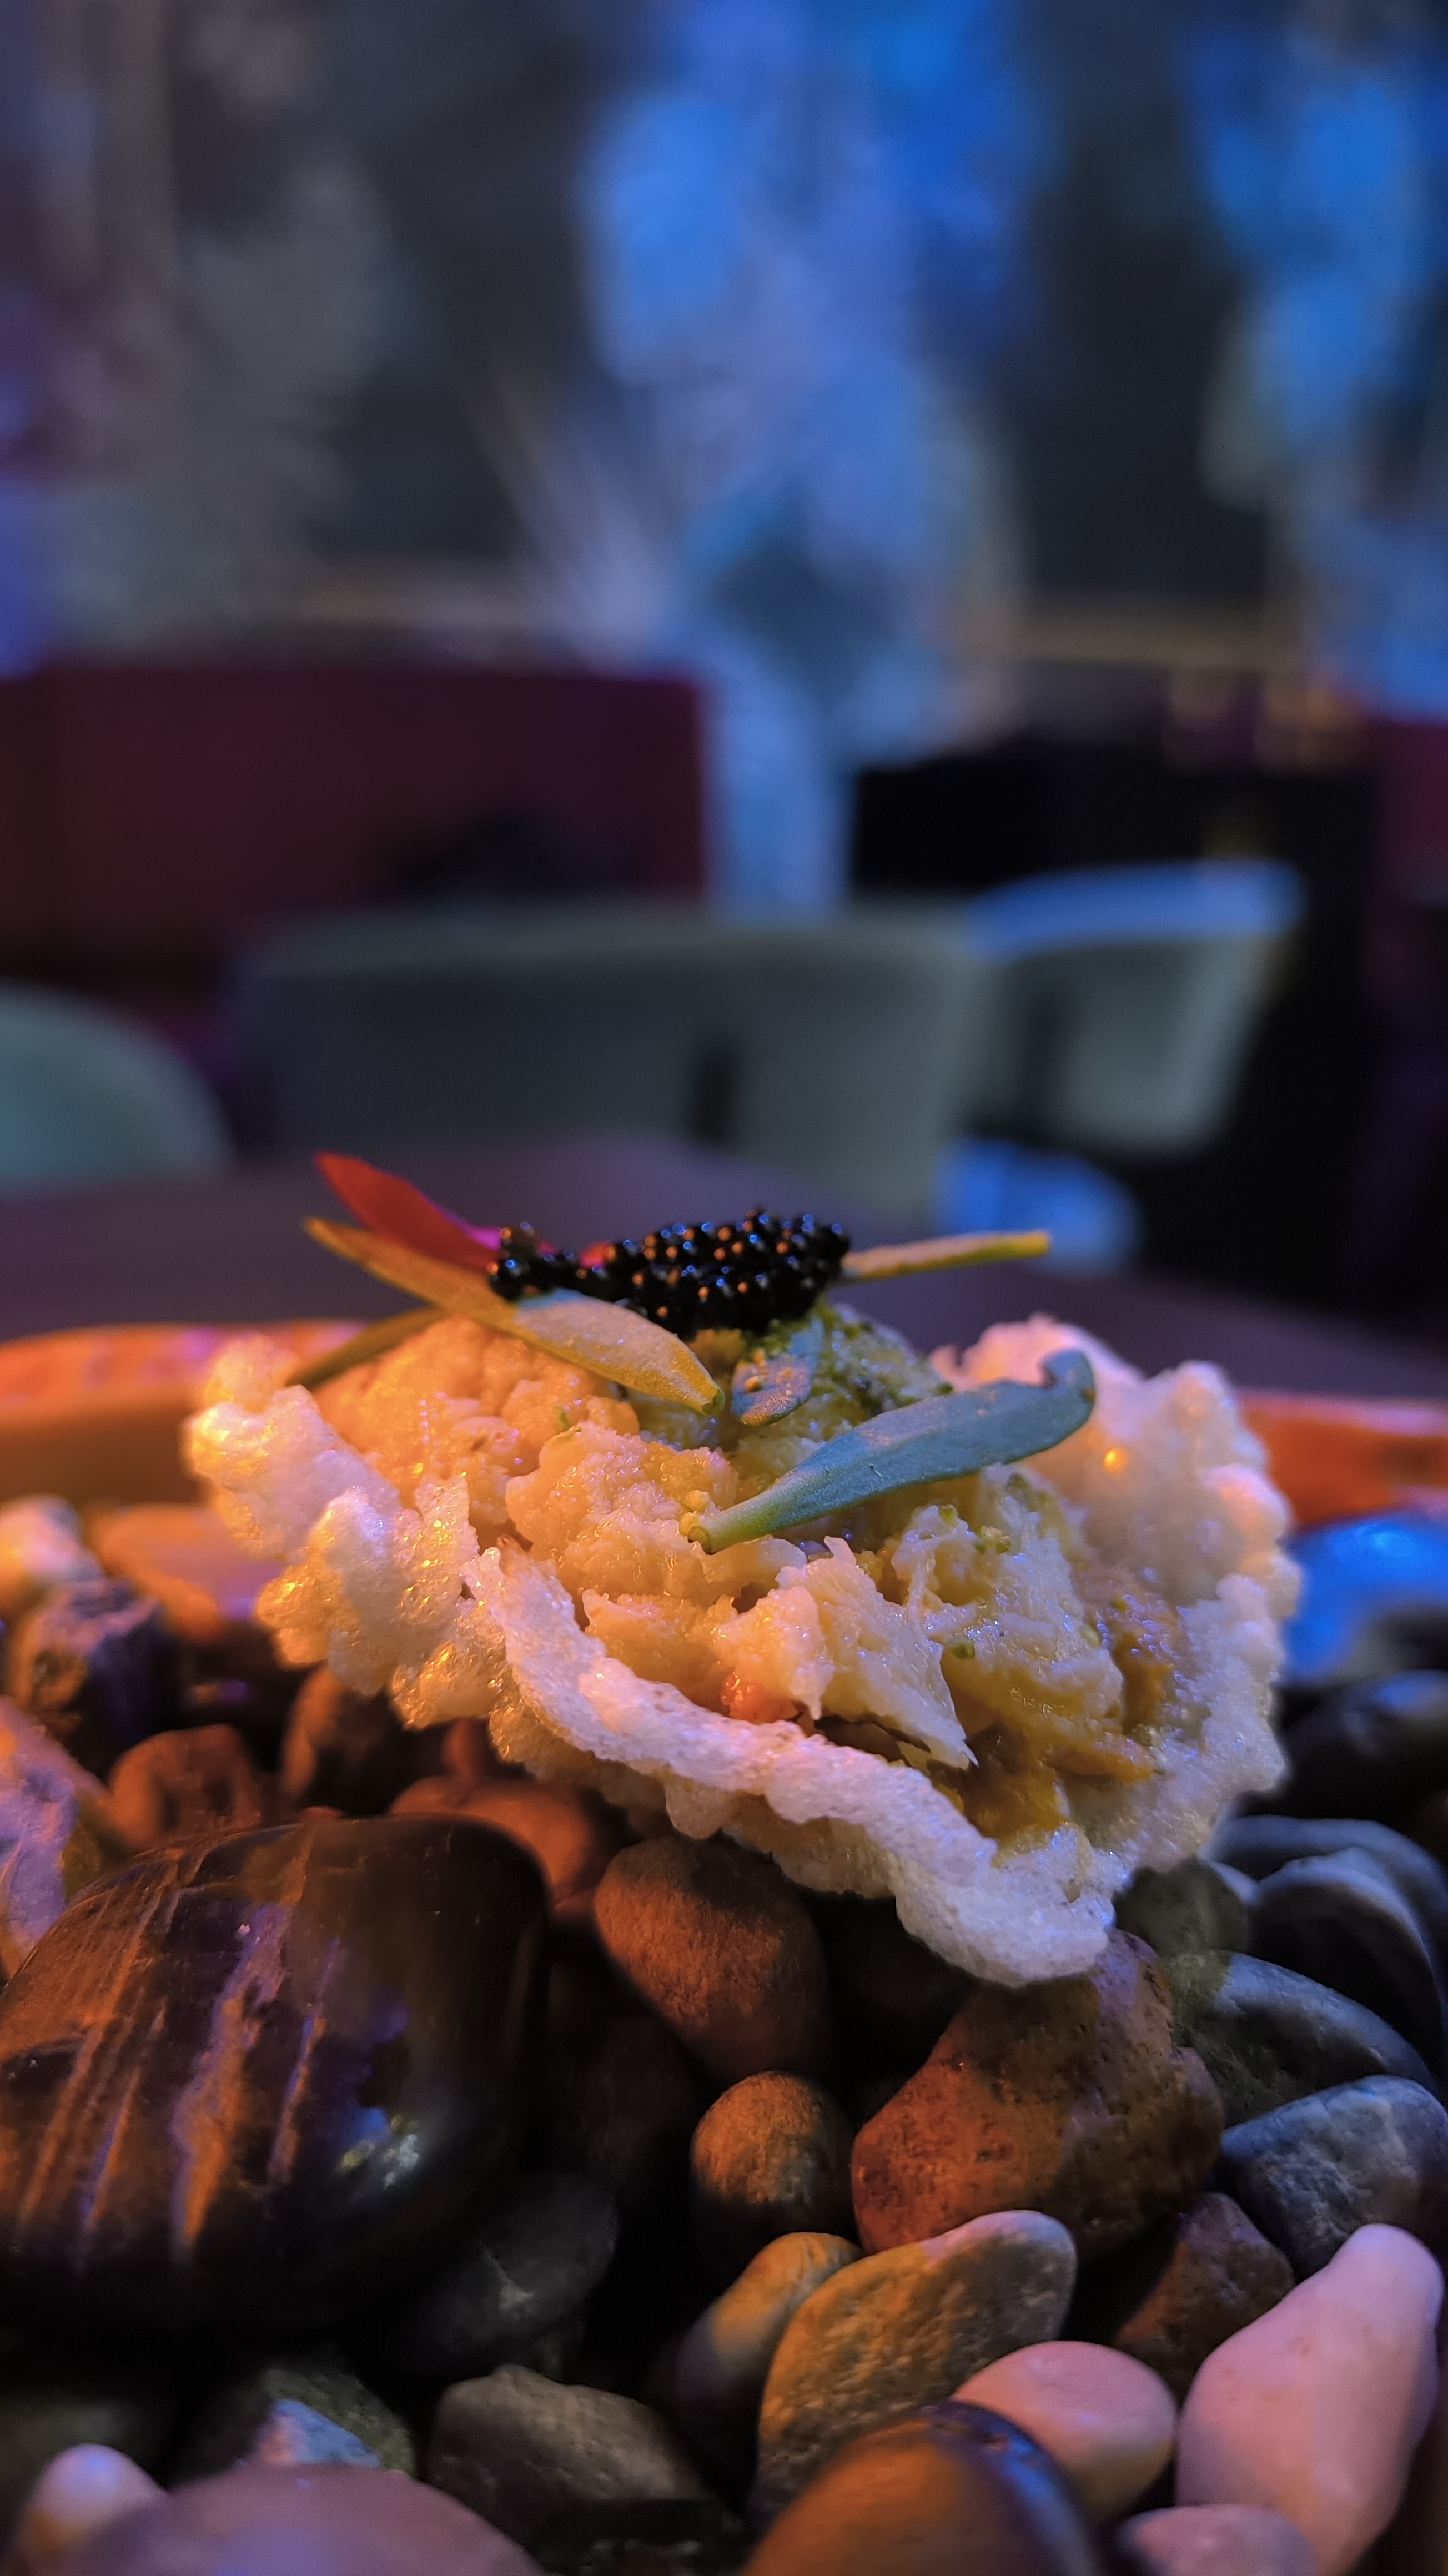 <b>Pu Khao Tang</b><br>Soaked Crab Meat in Coconut milk, capped with a Caviar & Passionfruit Jim Jaew, served on Rice Cracker<br>